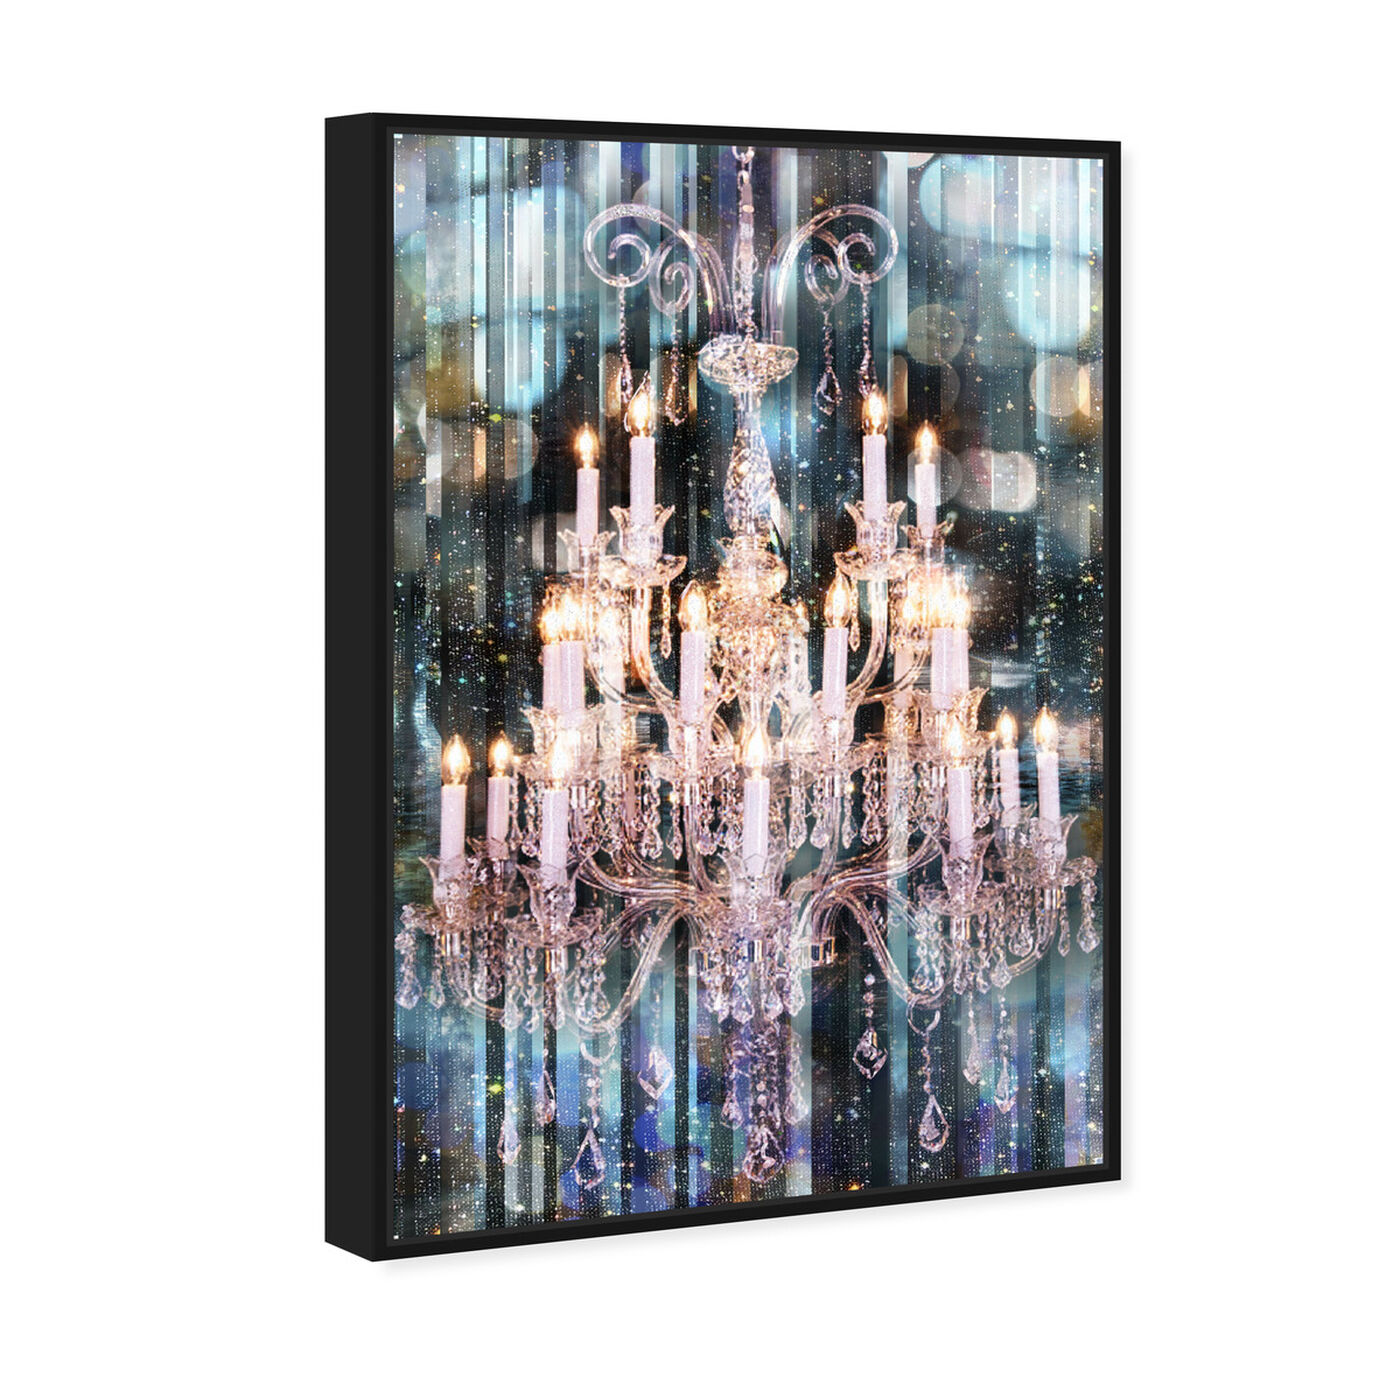 Angled view of Diamond Covered Eyes featuring fashion and glam and chandeliers art.